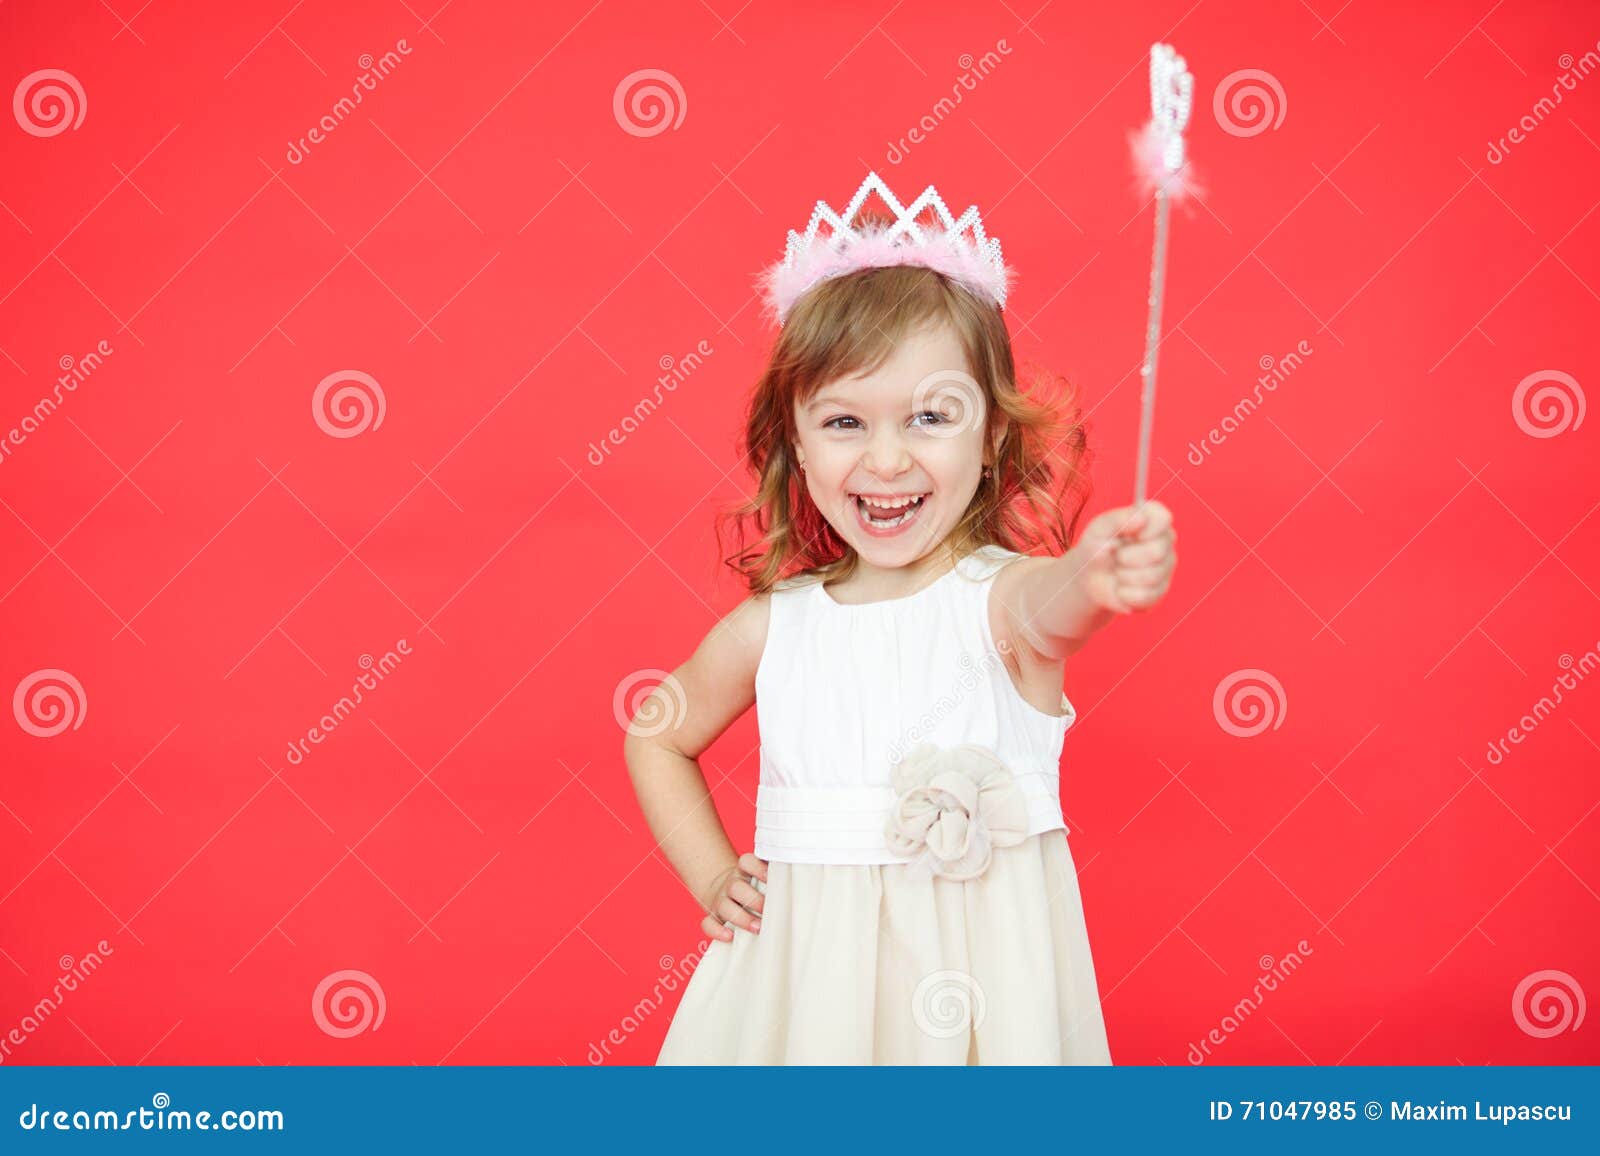 Little Girl Holding a Magic Wand in Her Hand Stock Image - Image of ...